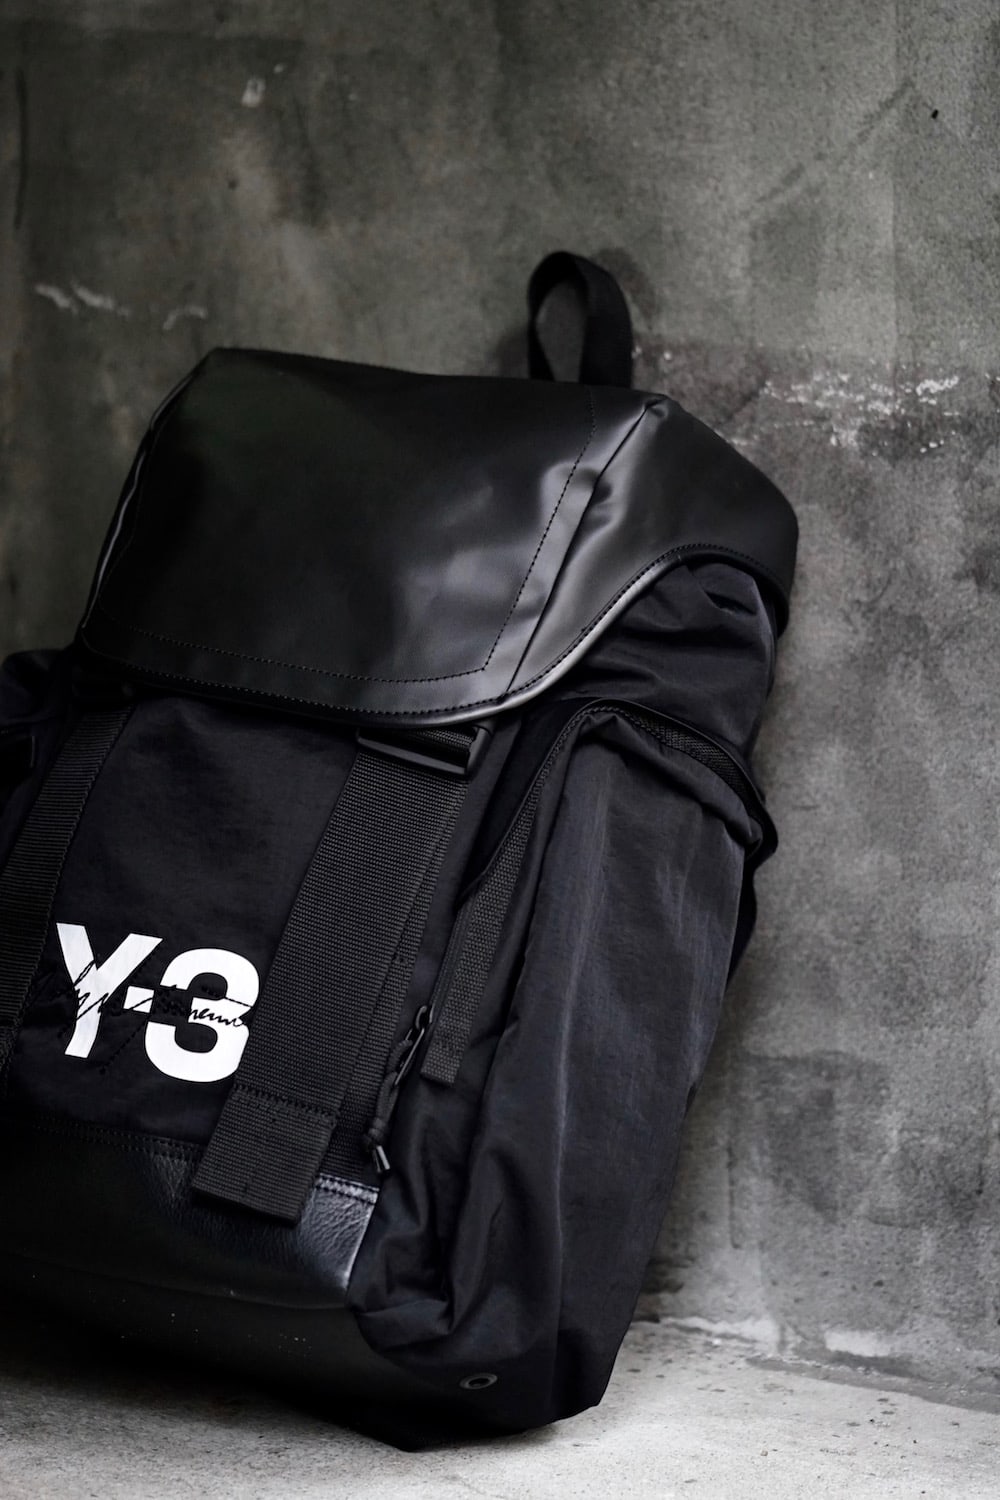 Y-3 XS Mobility Bag バックパック 2019 バッグ リュック